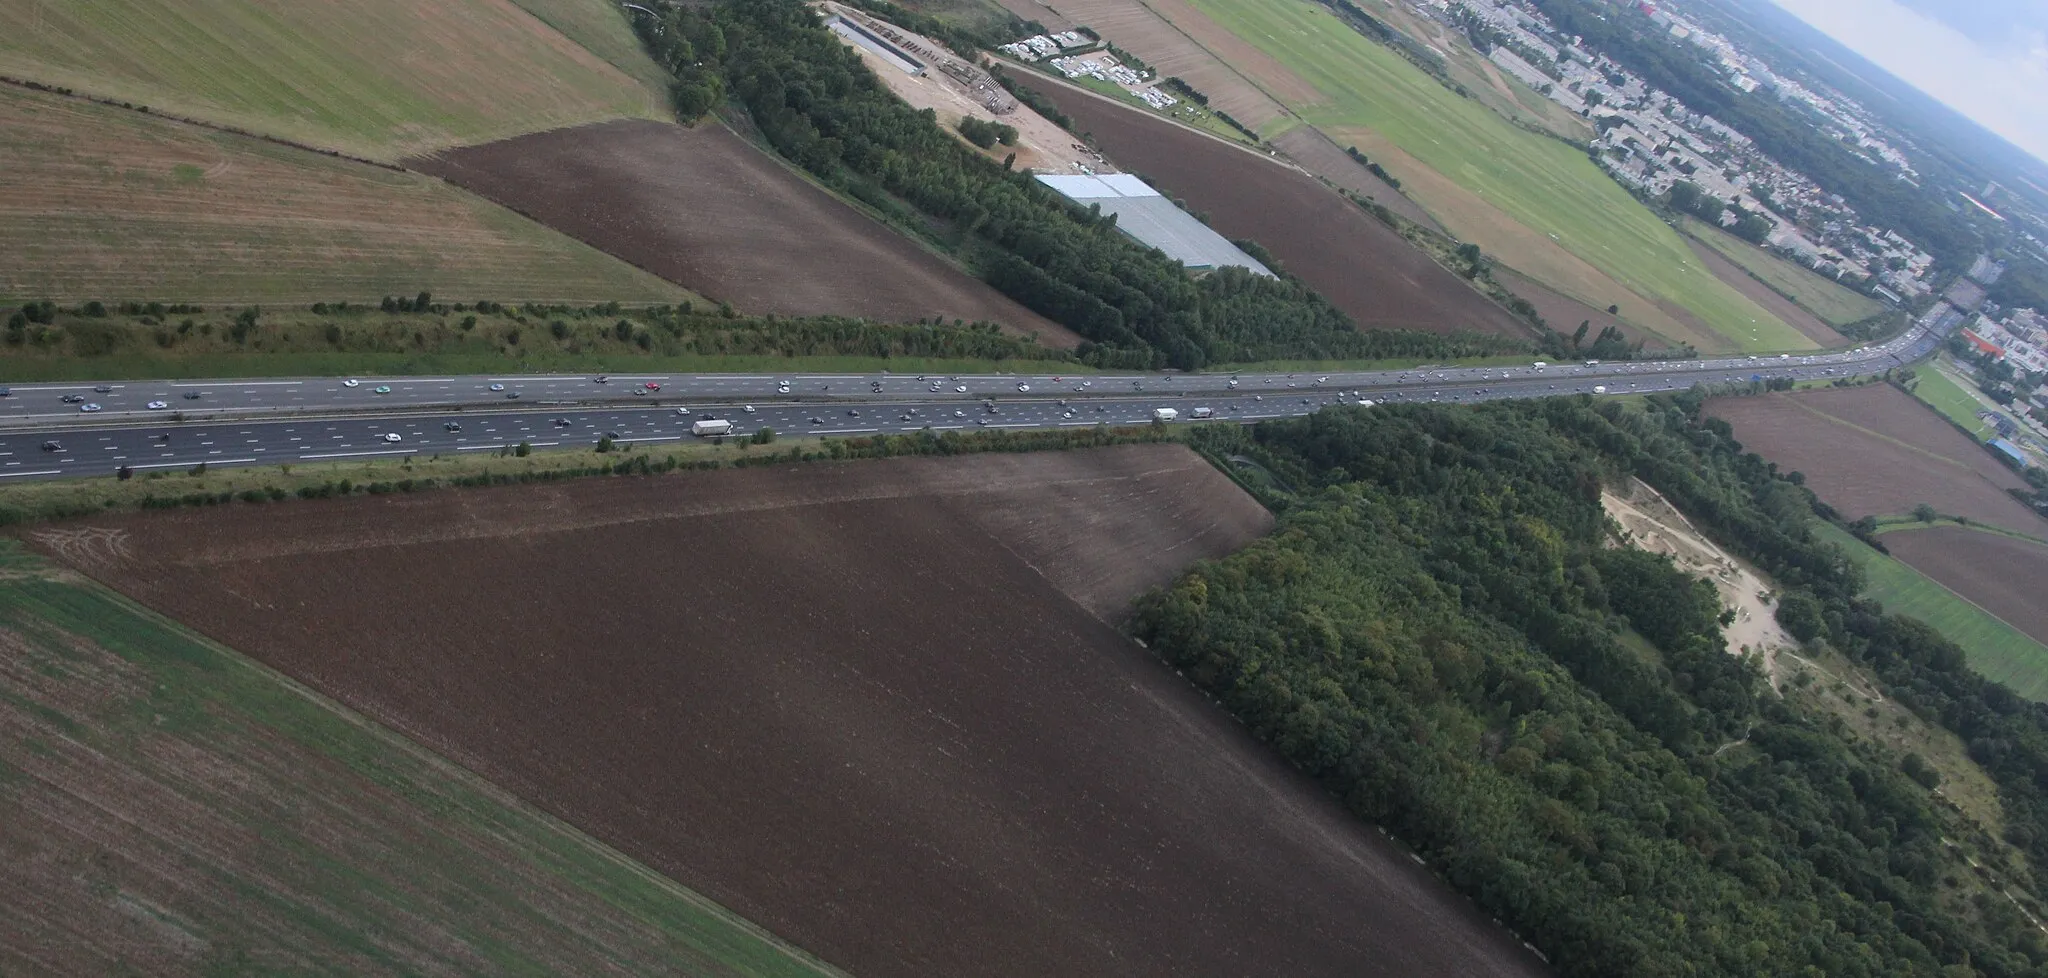 Photo showing: A12 highway seen from a plane in the communes of Saint-Cyr-l'École and Bailly, Yvelines, France.